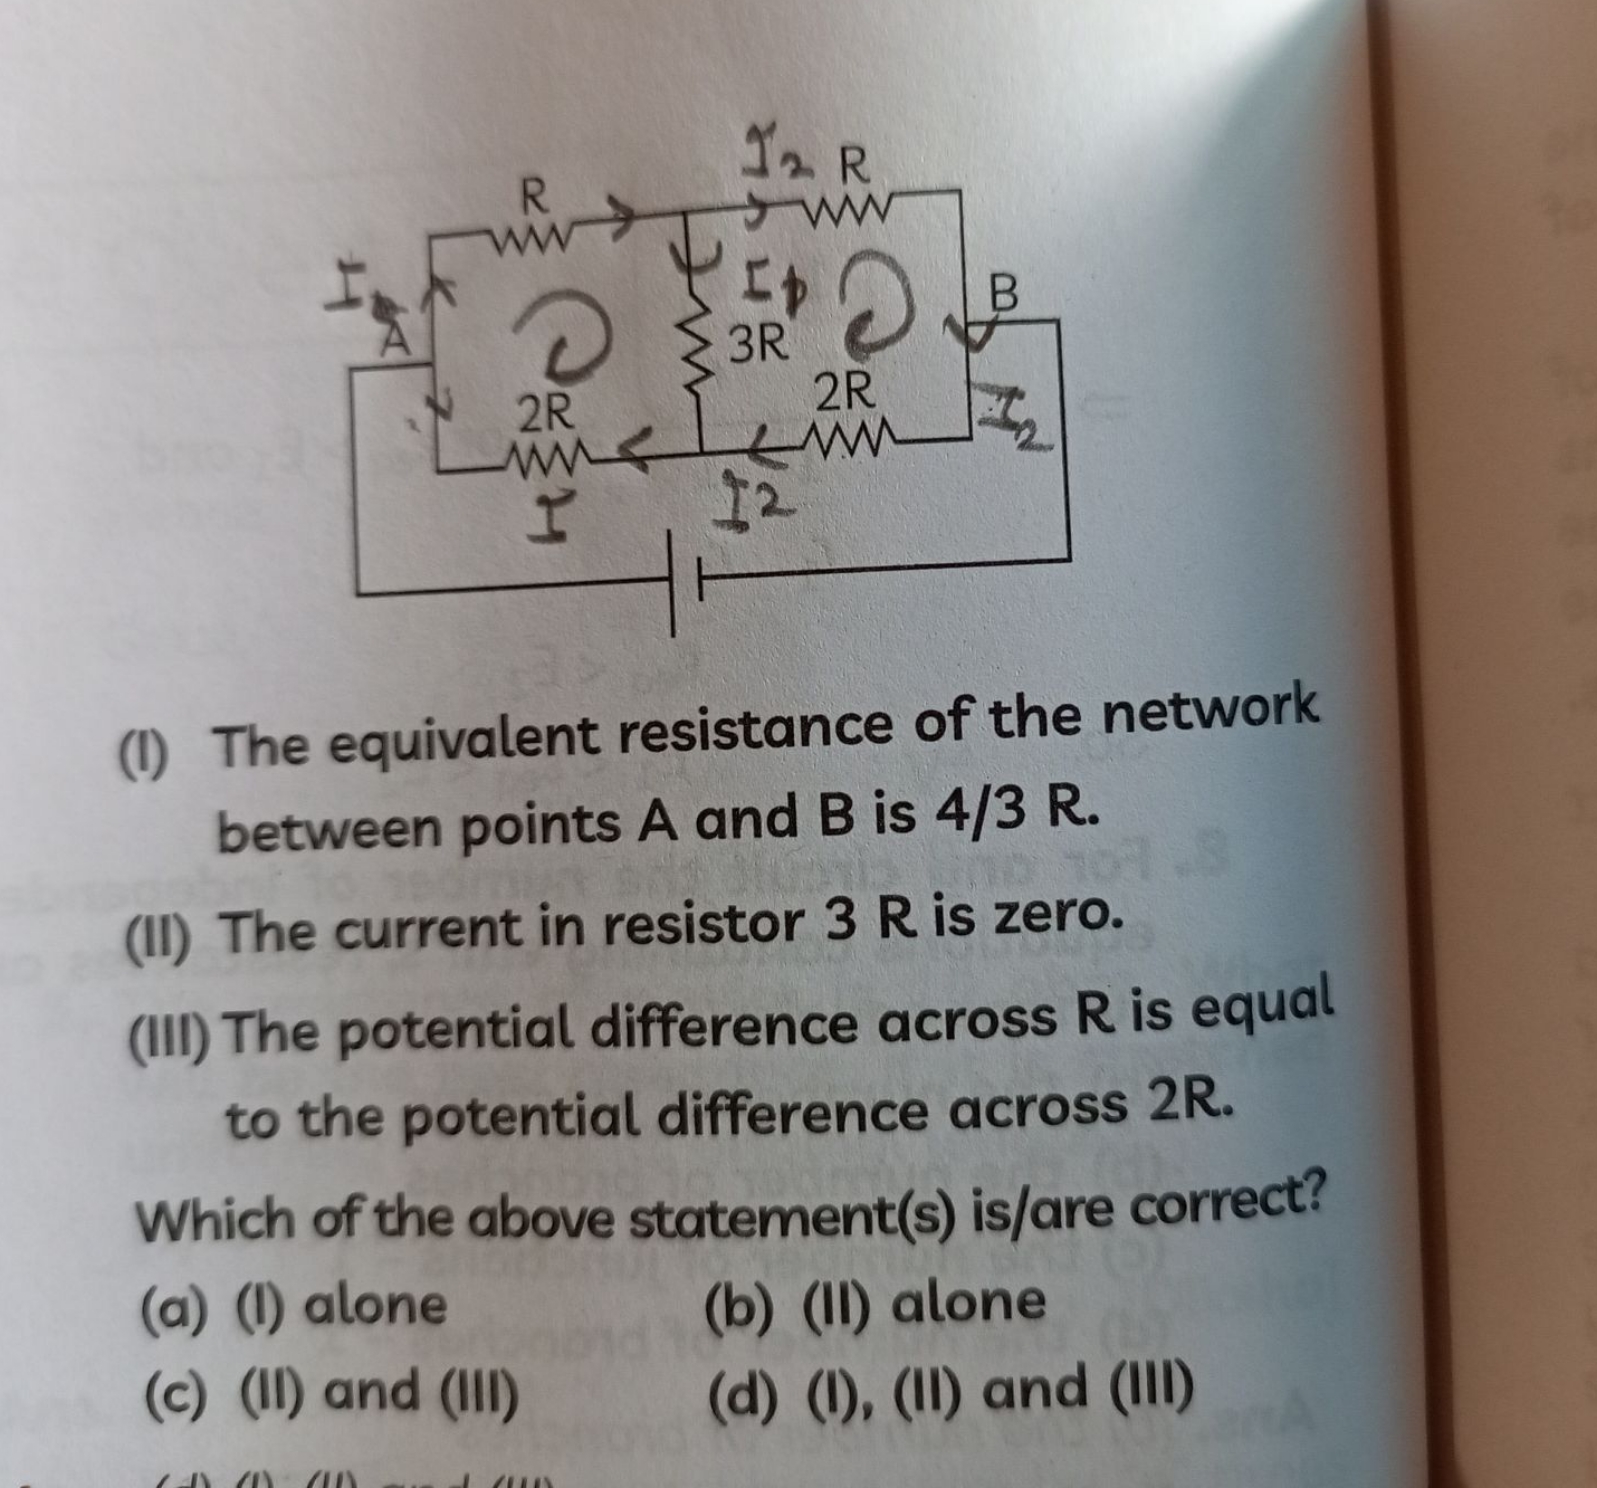  The equivalent resistance of the network between points A and B is 4/